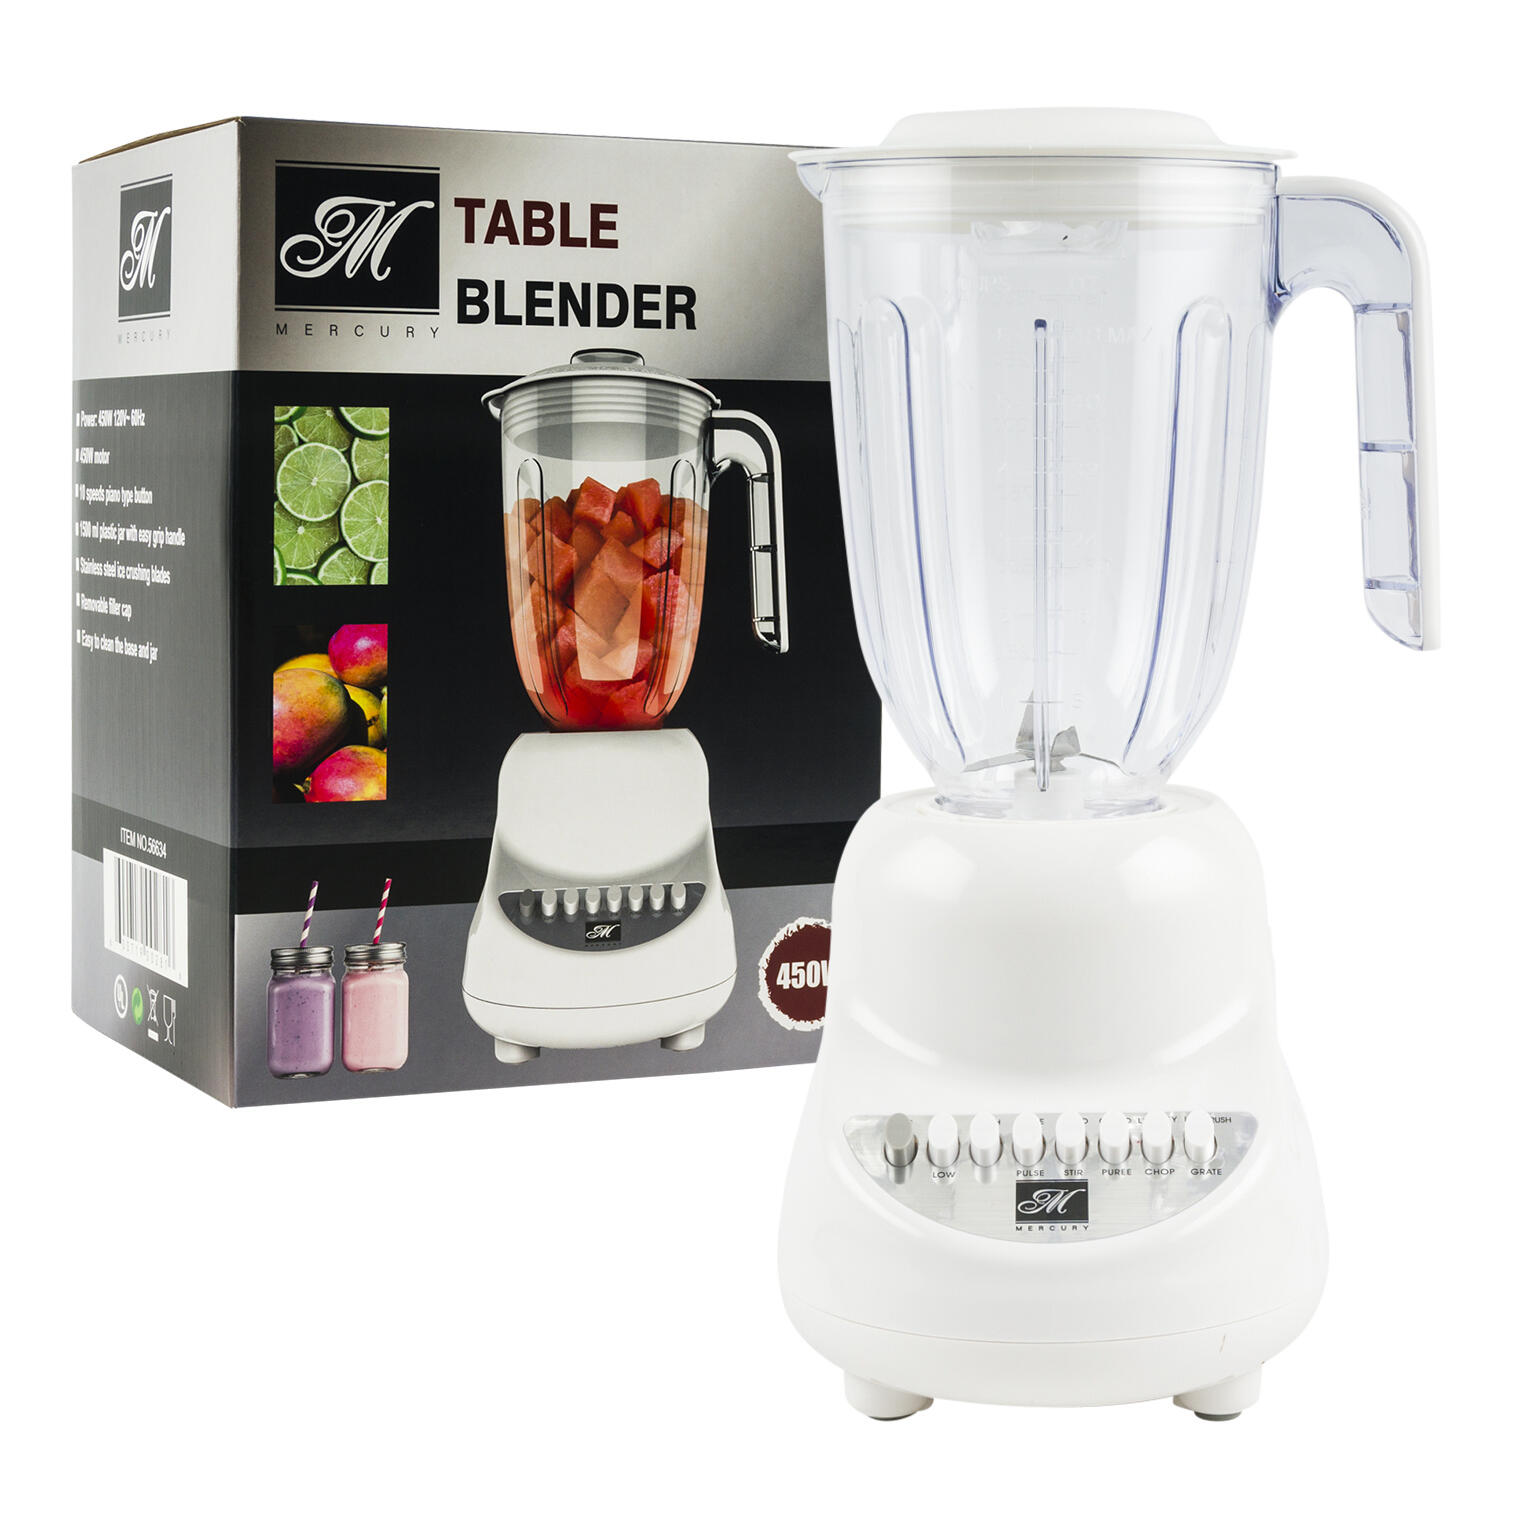 This Tabletop Blender 10 Speed with 1500lm Plastic Jar Stainless Steel Blades is made with love by Premier Homegoods! Shop more unique gift ideas today with Spots Initiatives, the best way to support creators.